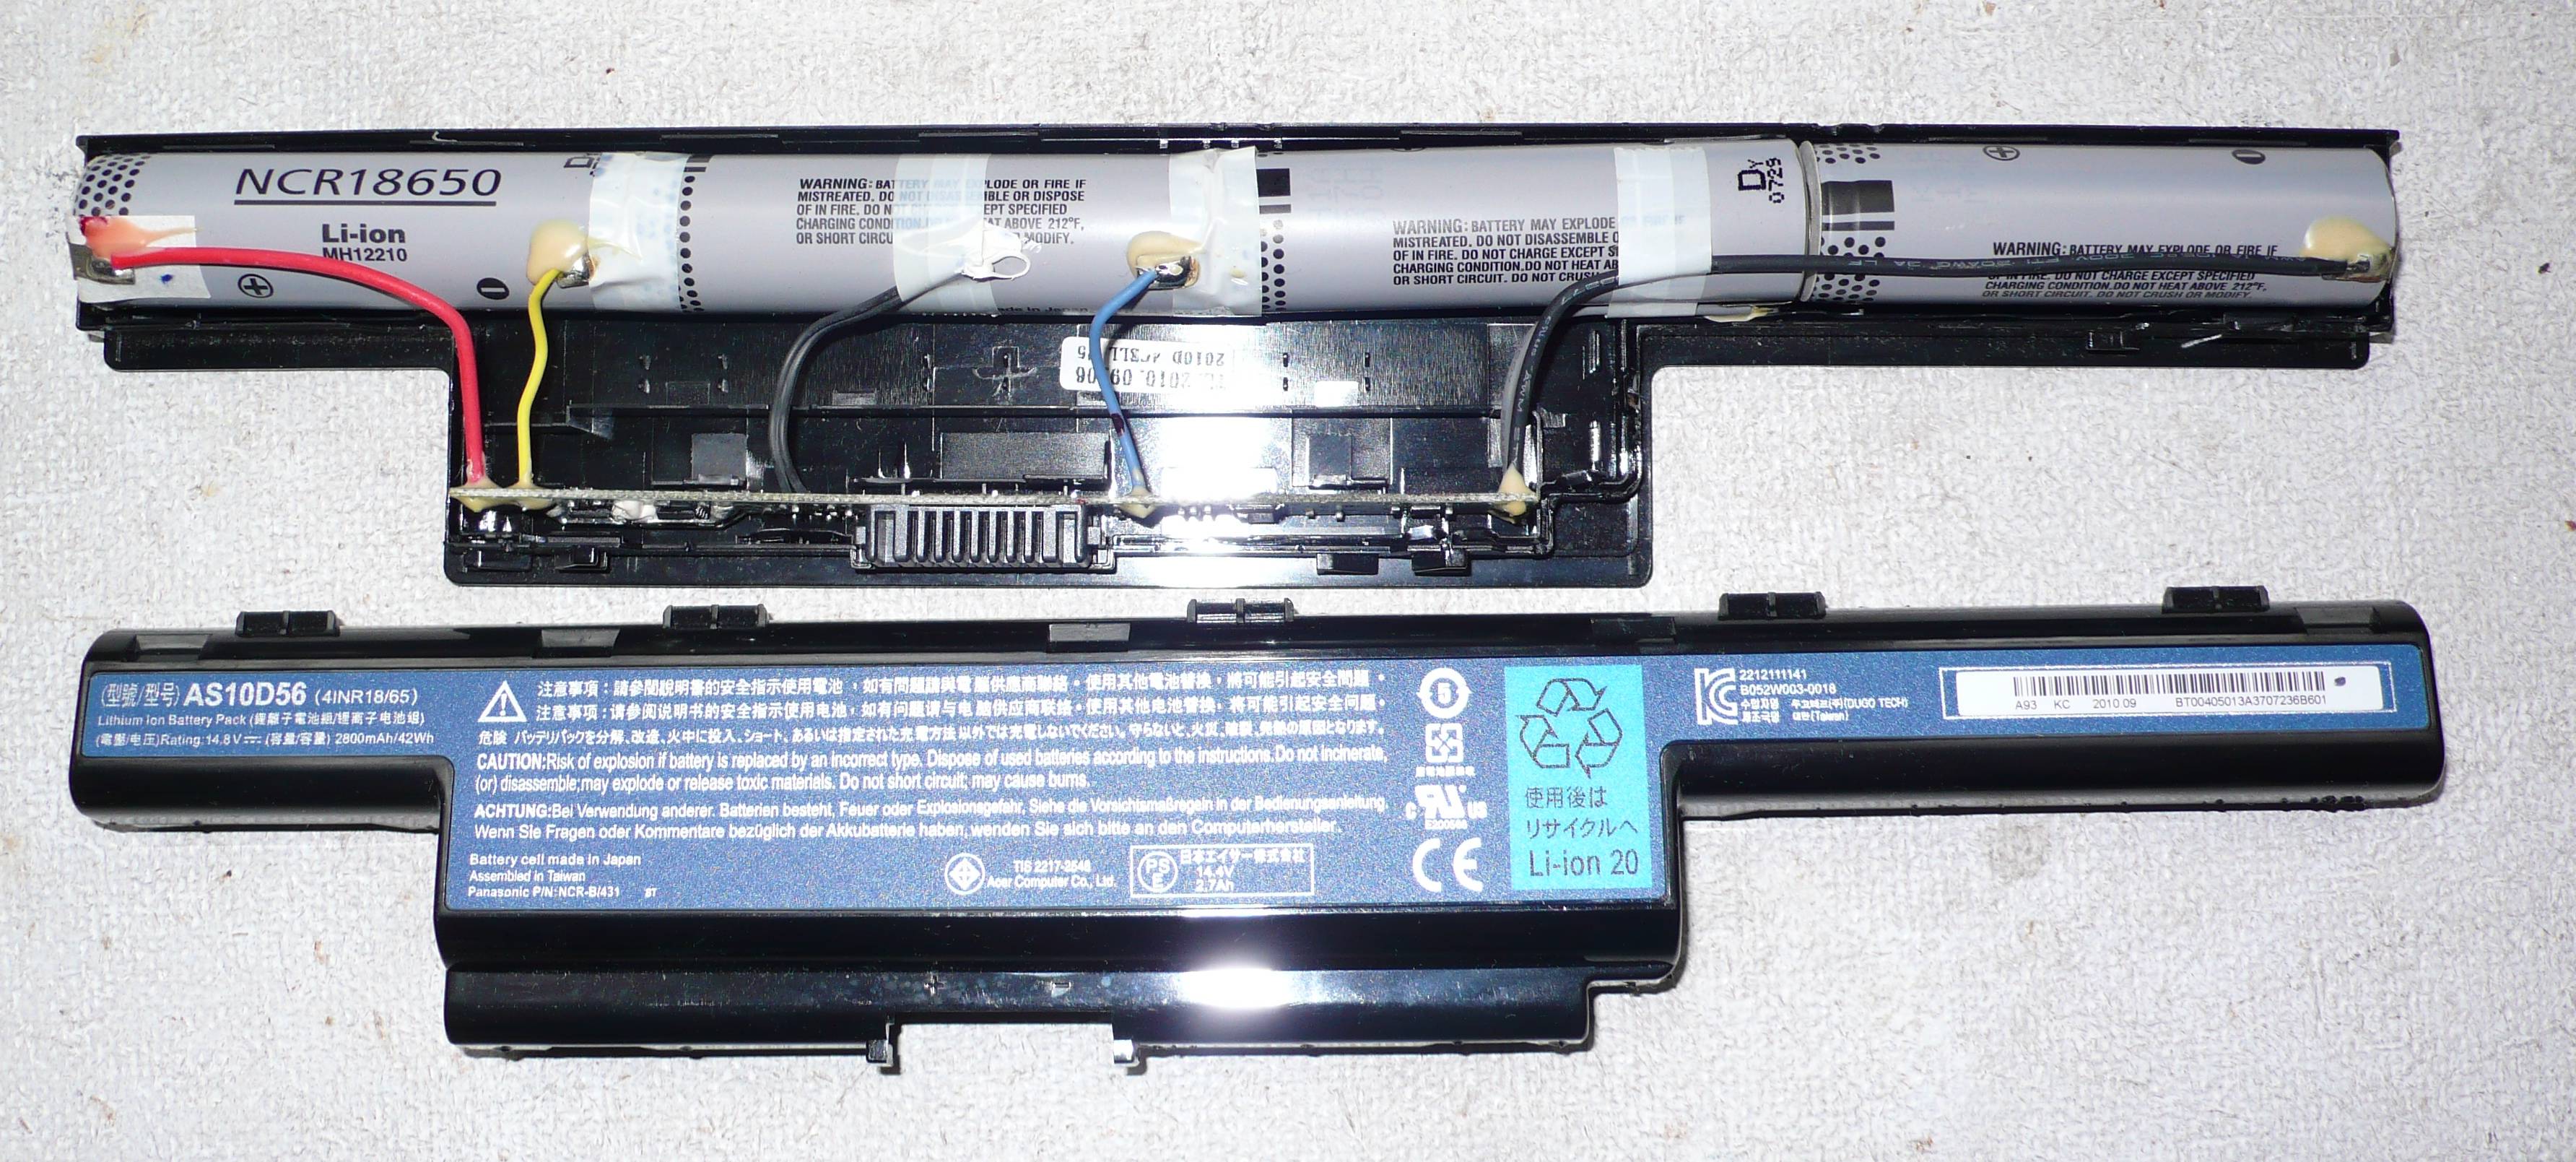 Replace with spare. Батарея ноутбука Acer модель Aspire 26. Аккумулятор Acer Aspire e1-522. Аккумулятор ноутбука dell 44.